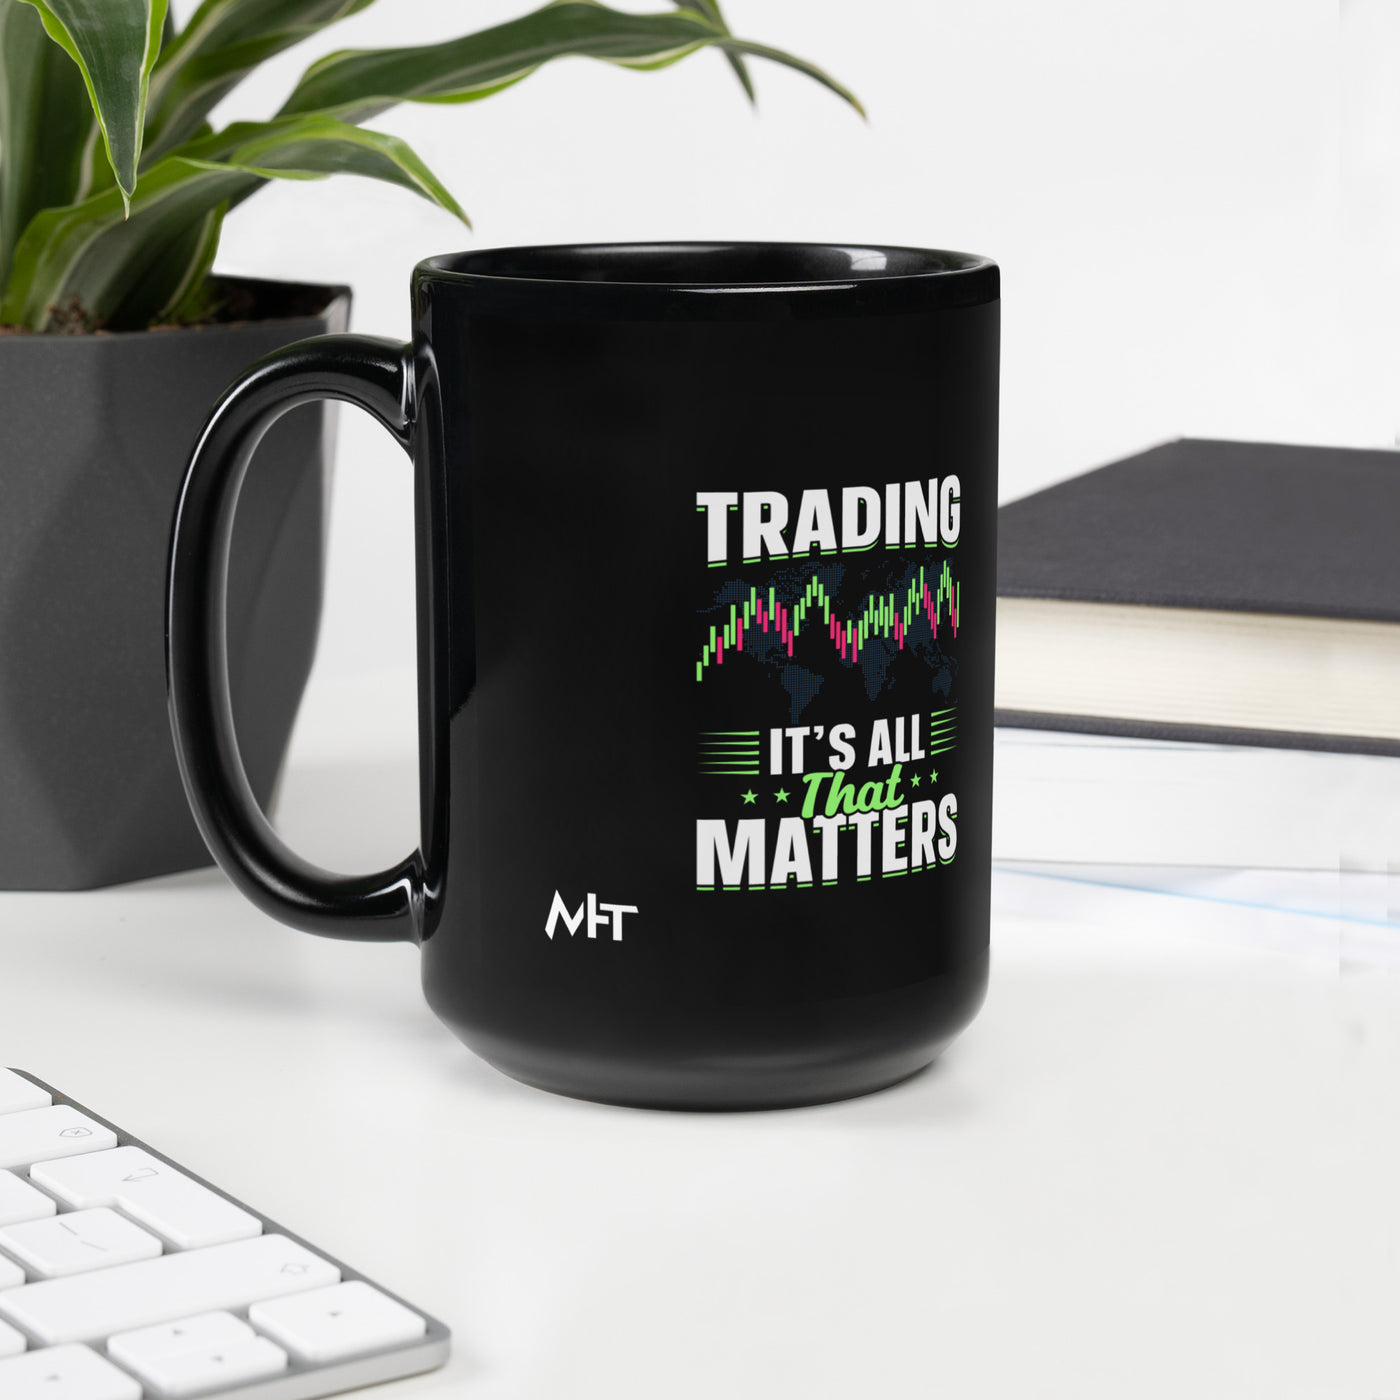 Trading it is all that matters - Black Glossy Mug